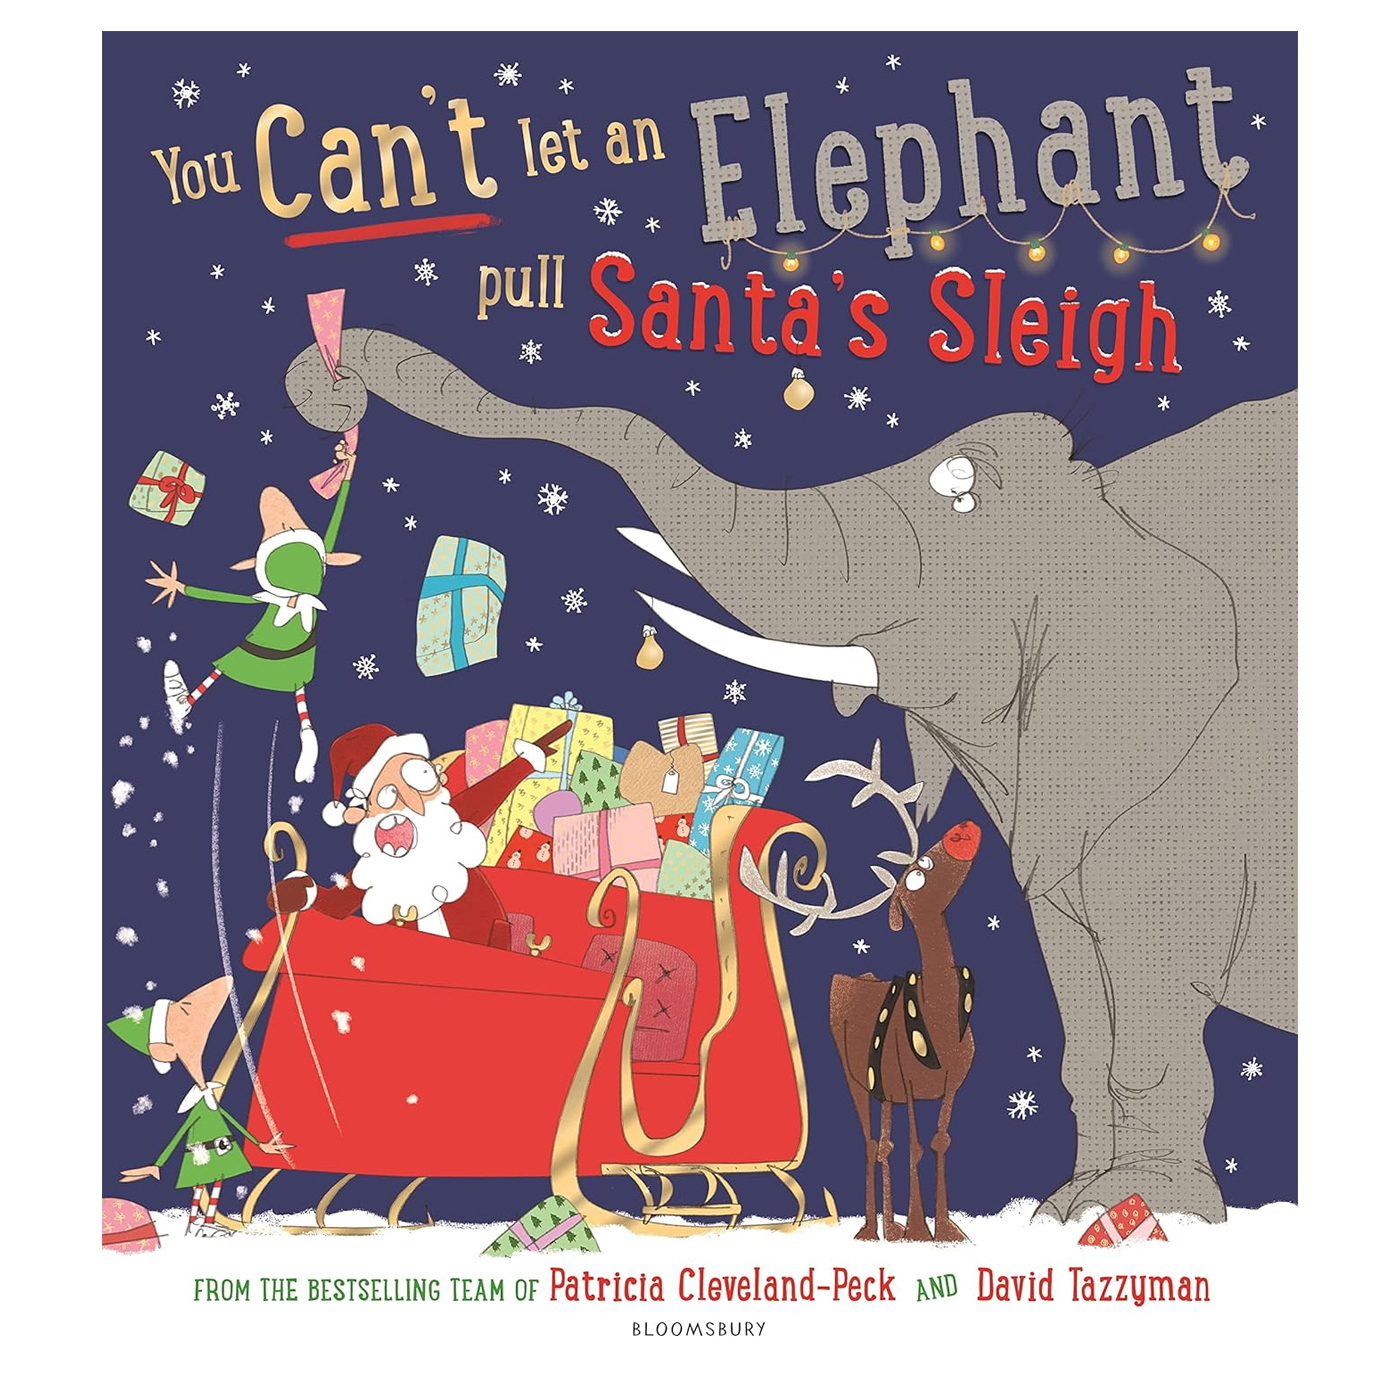 BLOOMSBURY You Can't let an Elephant pull Santa's Sleigh